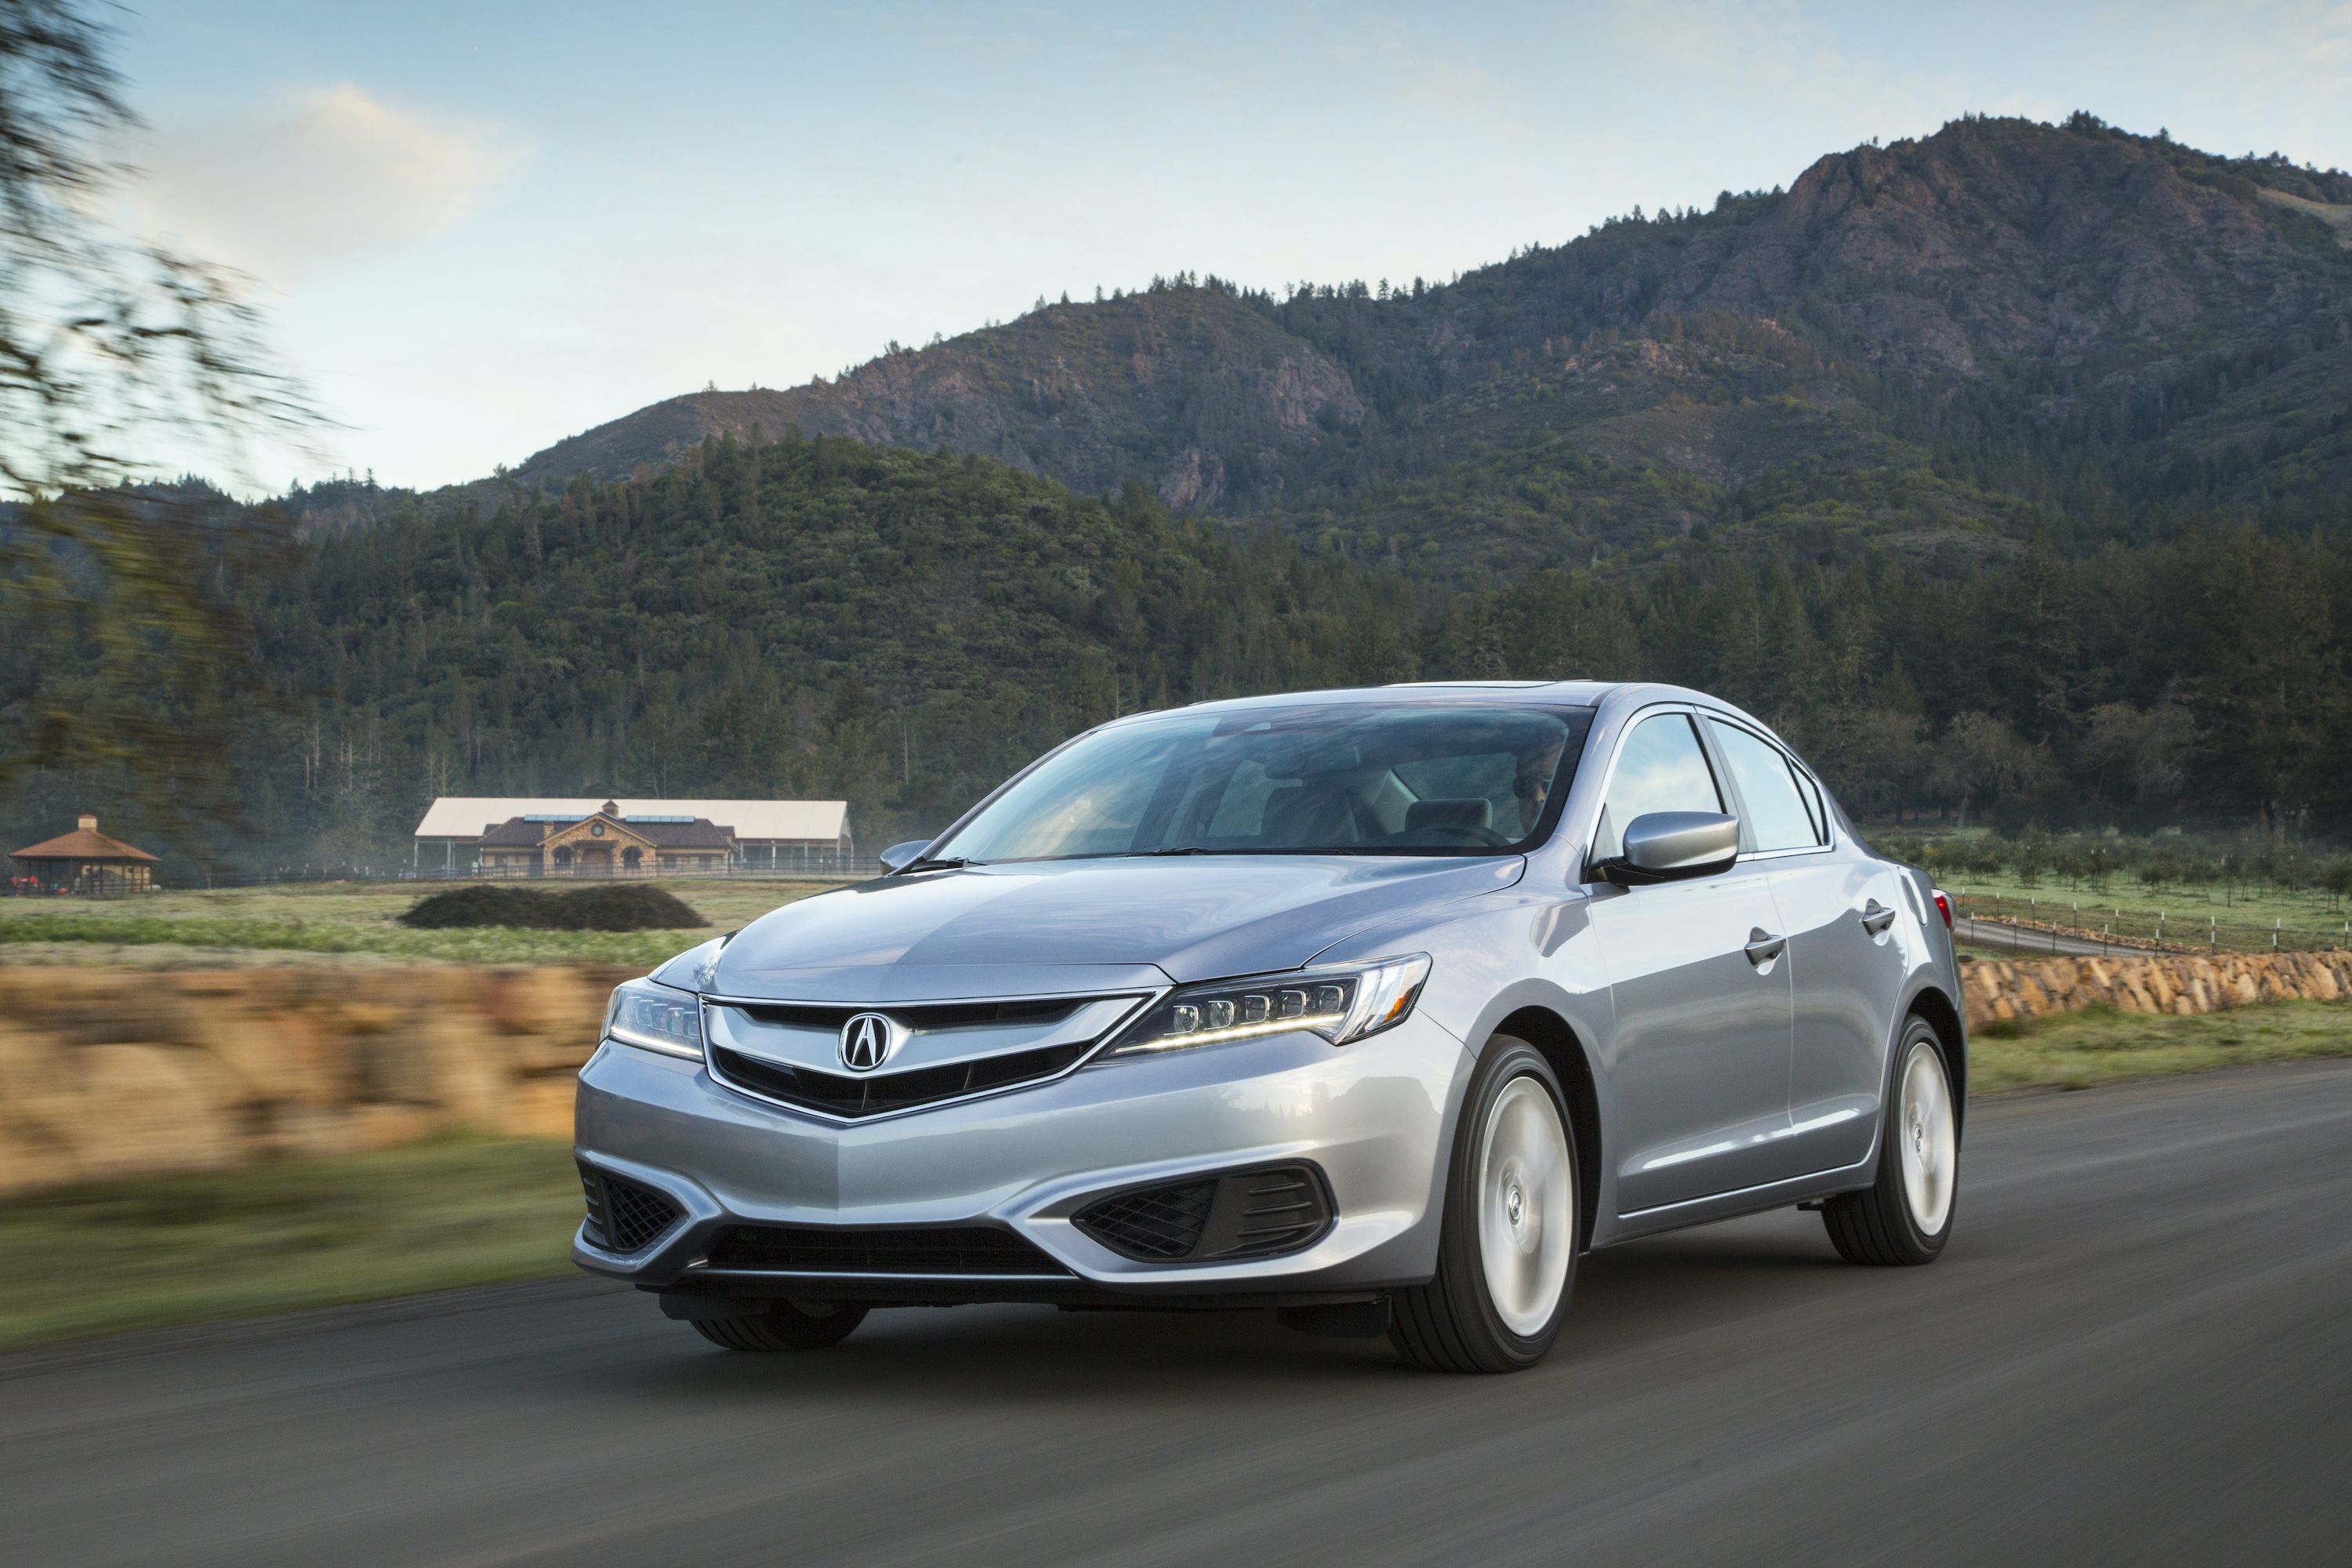 2018 Acura ILX Review, Pricing, and Specs